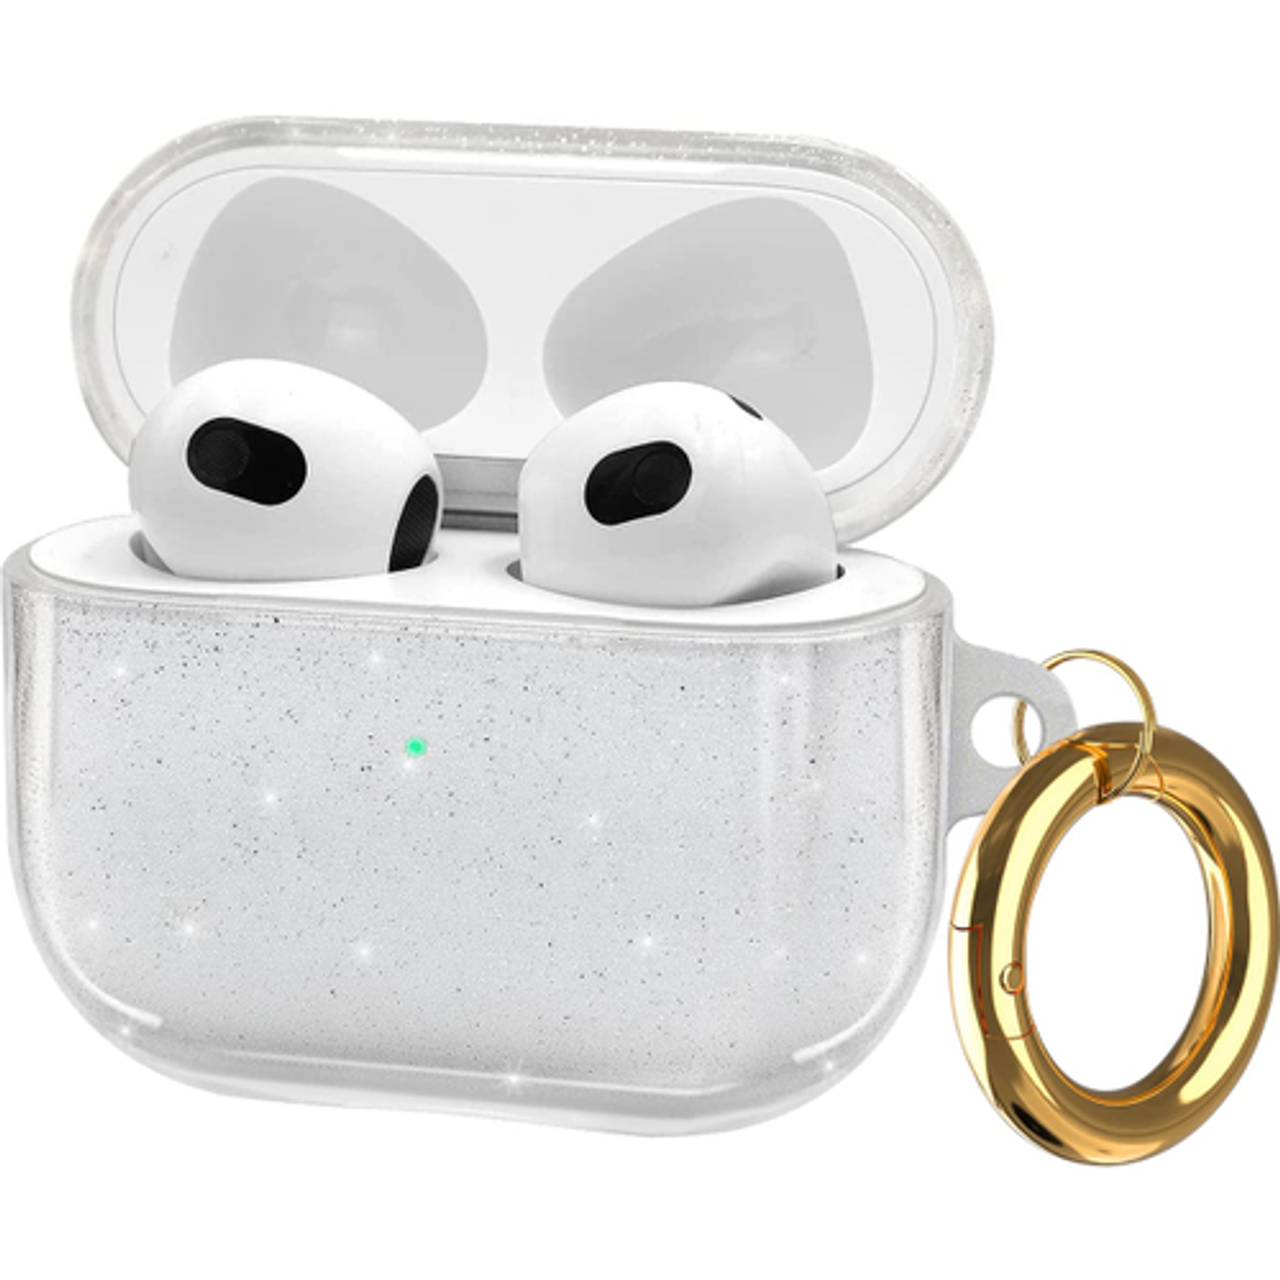 SaharaCase - Inspire Series Sparkle Case for Apple AirPods (3rd Generation) - Transparent